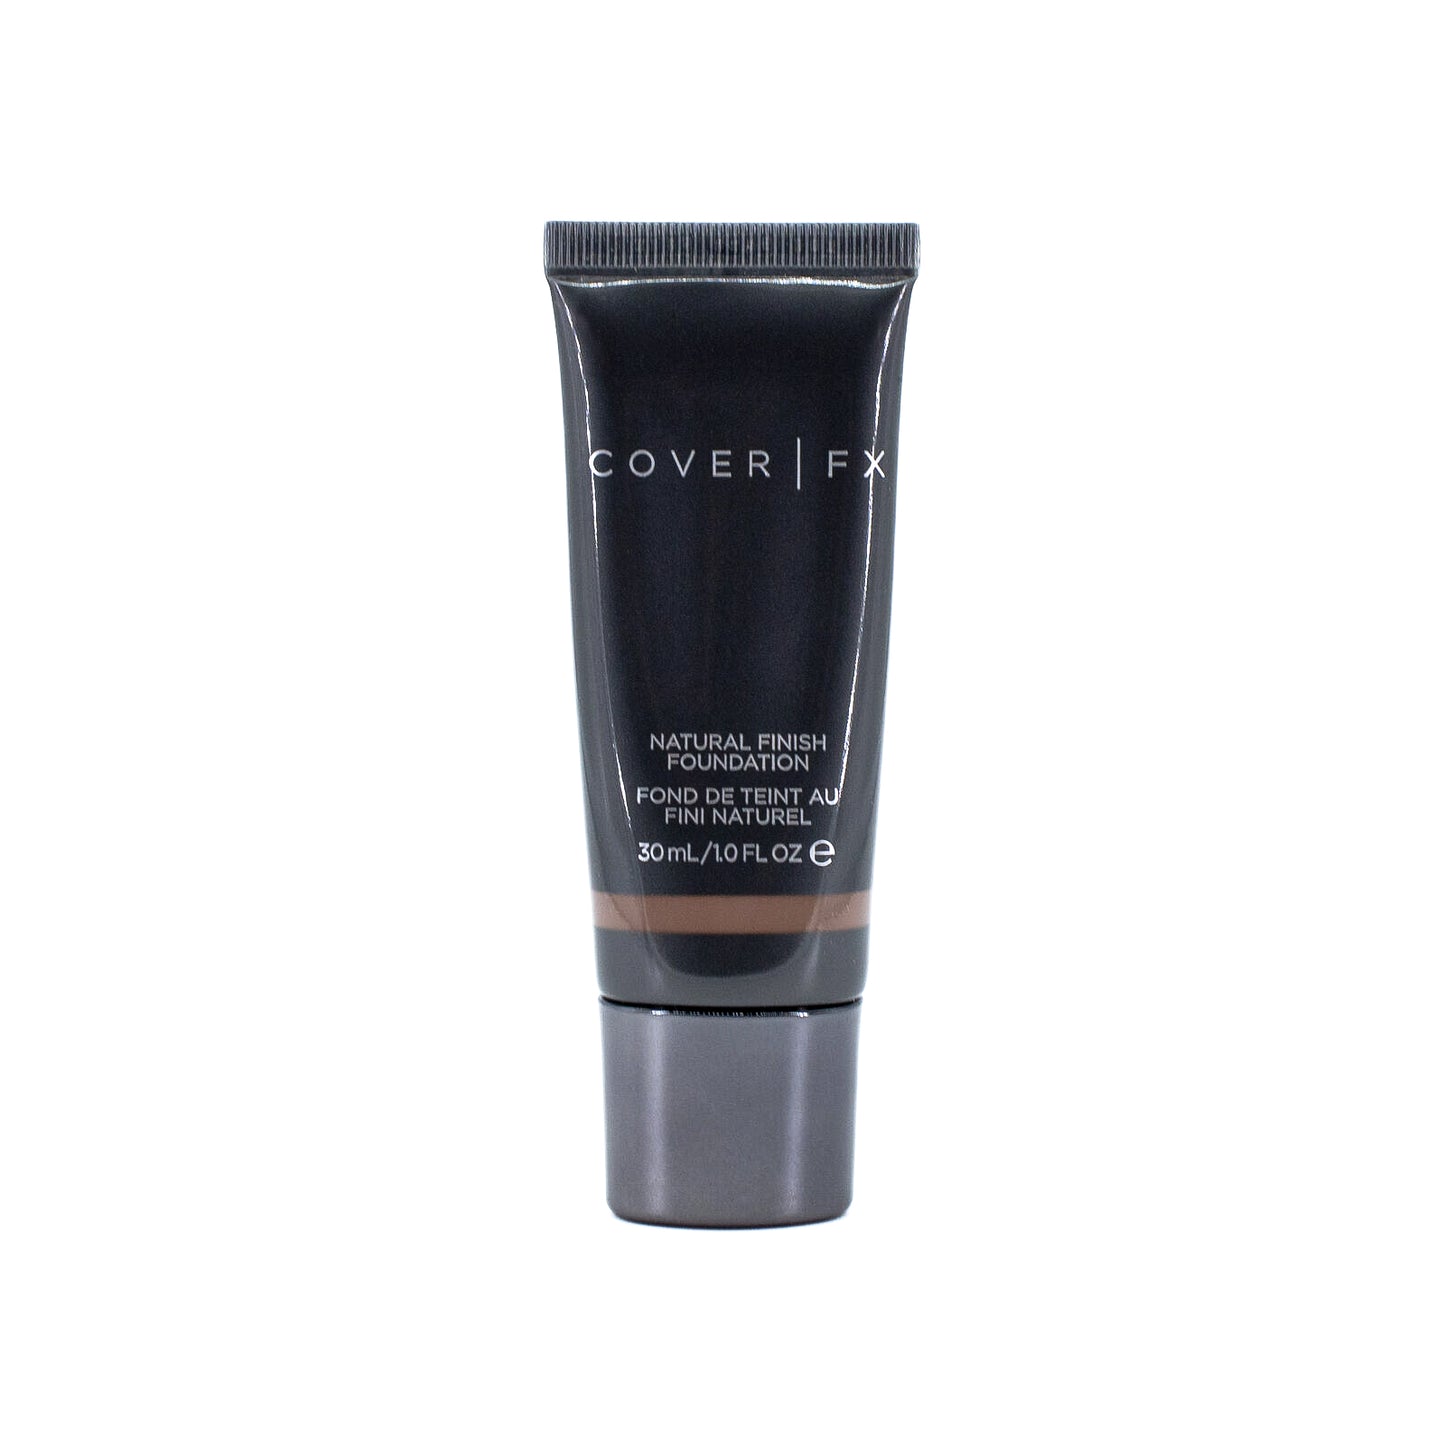 COVER FX Natural Finish Foundation P110 1oz - New